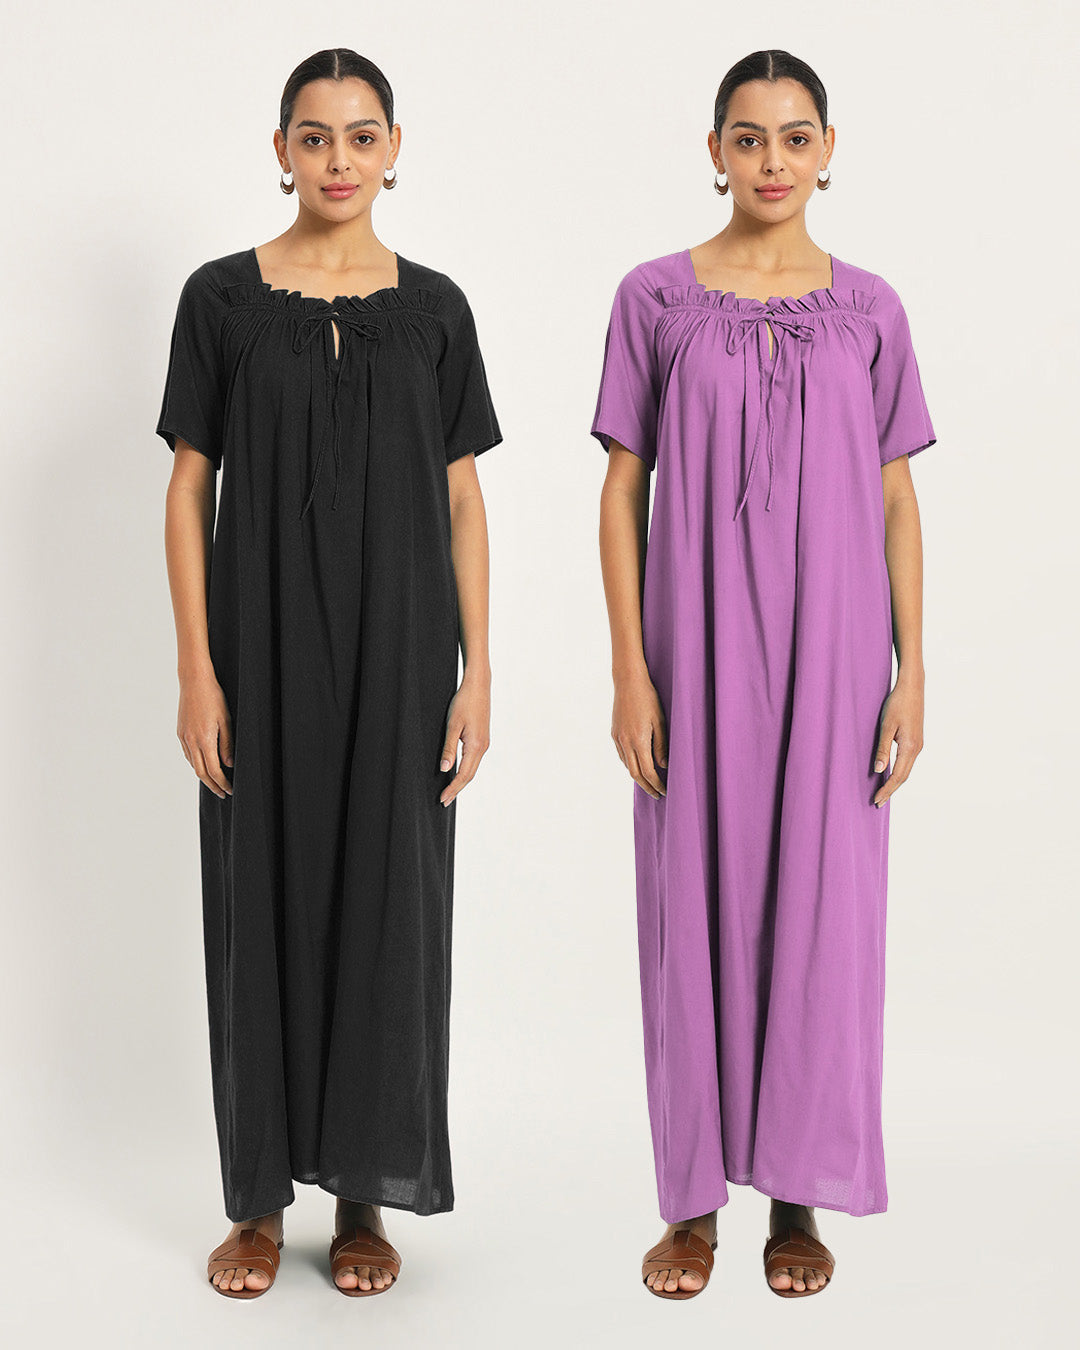 Combo: Classic Black & Wisteria Purple Breathable Bliss Nightdress